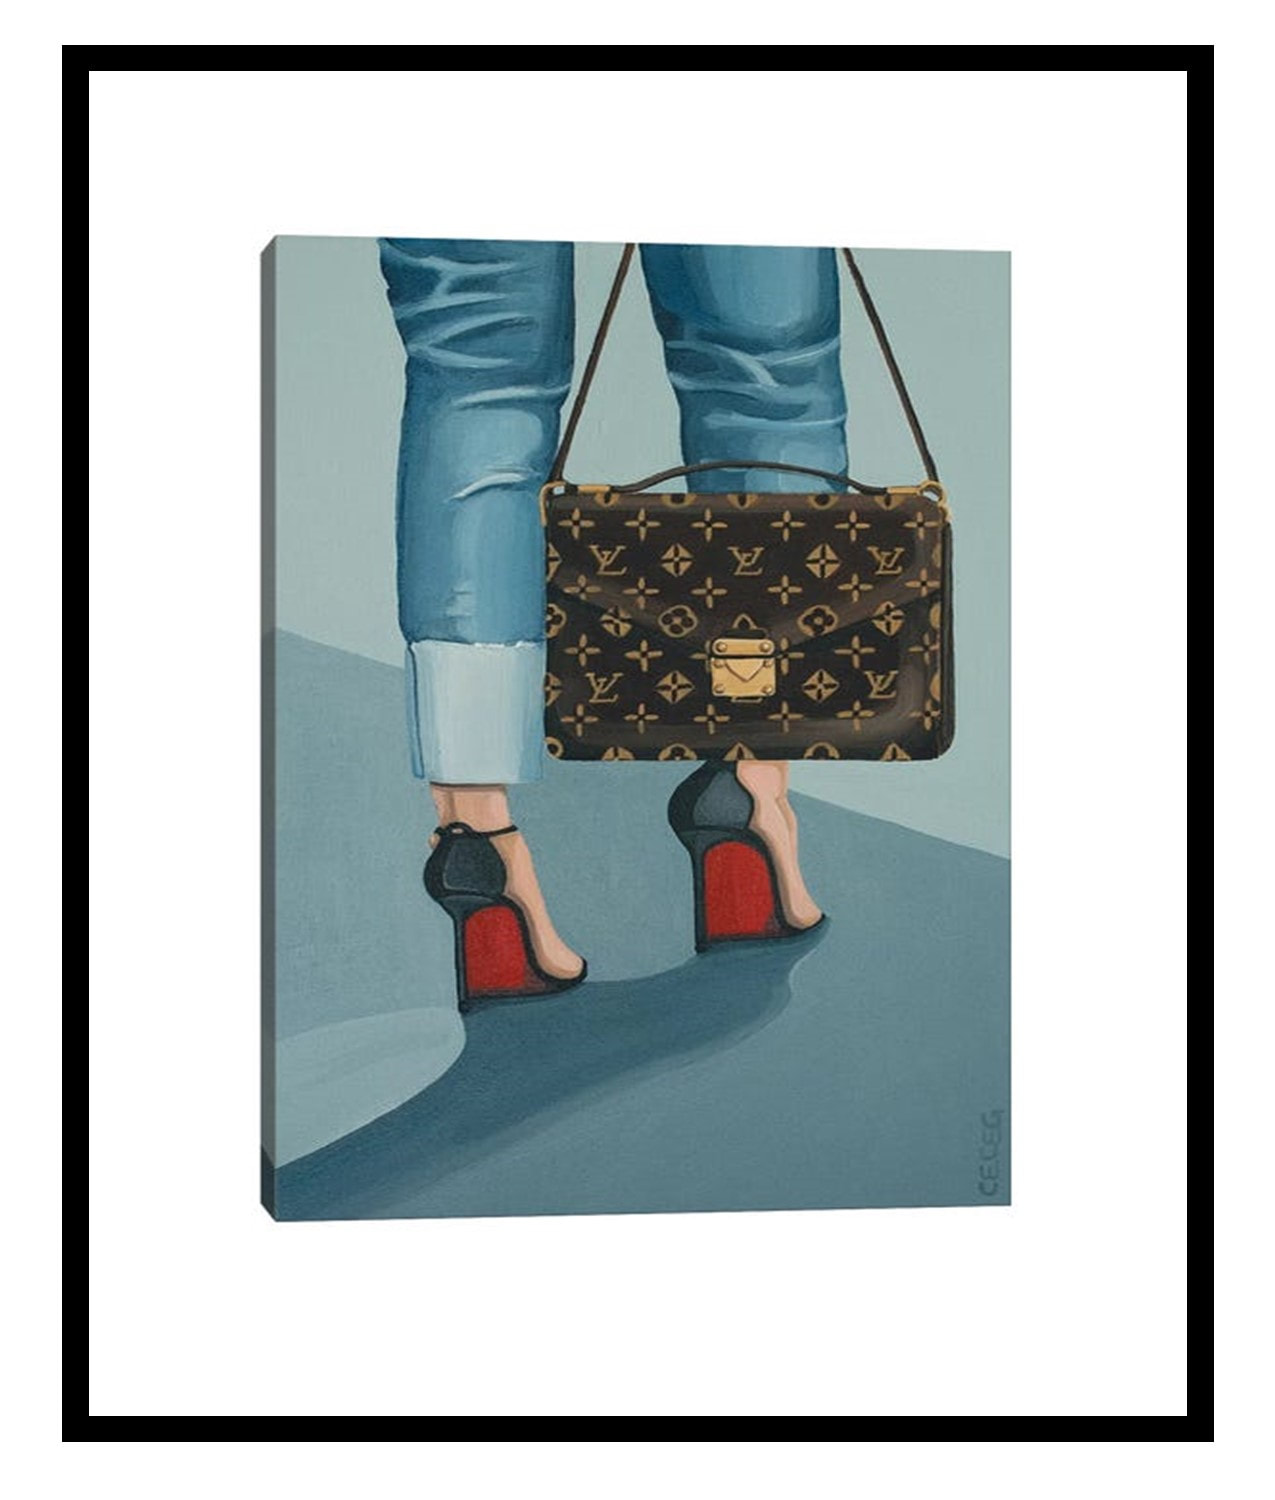 Louis Vuitton Coffee Cup Fashionista inspired 5x7 Poster or Sign